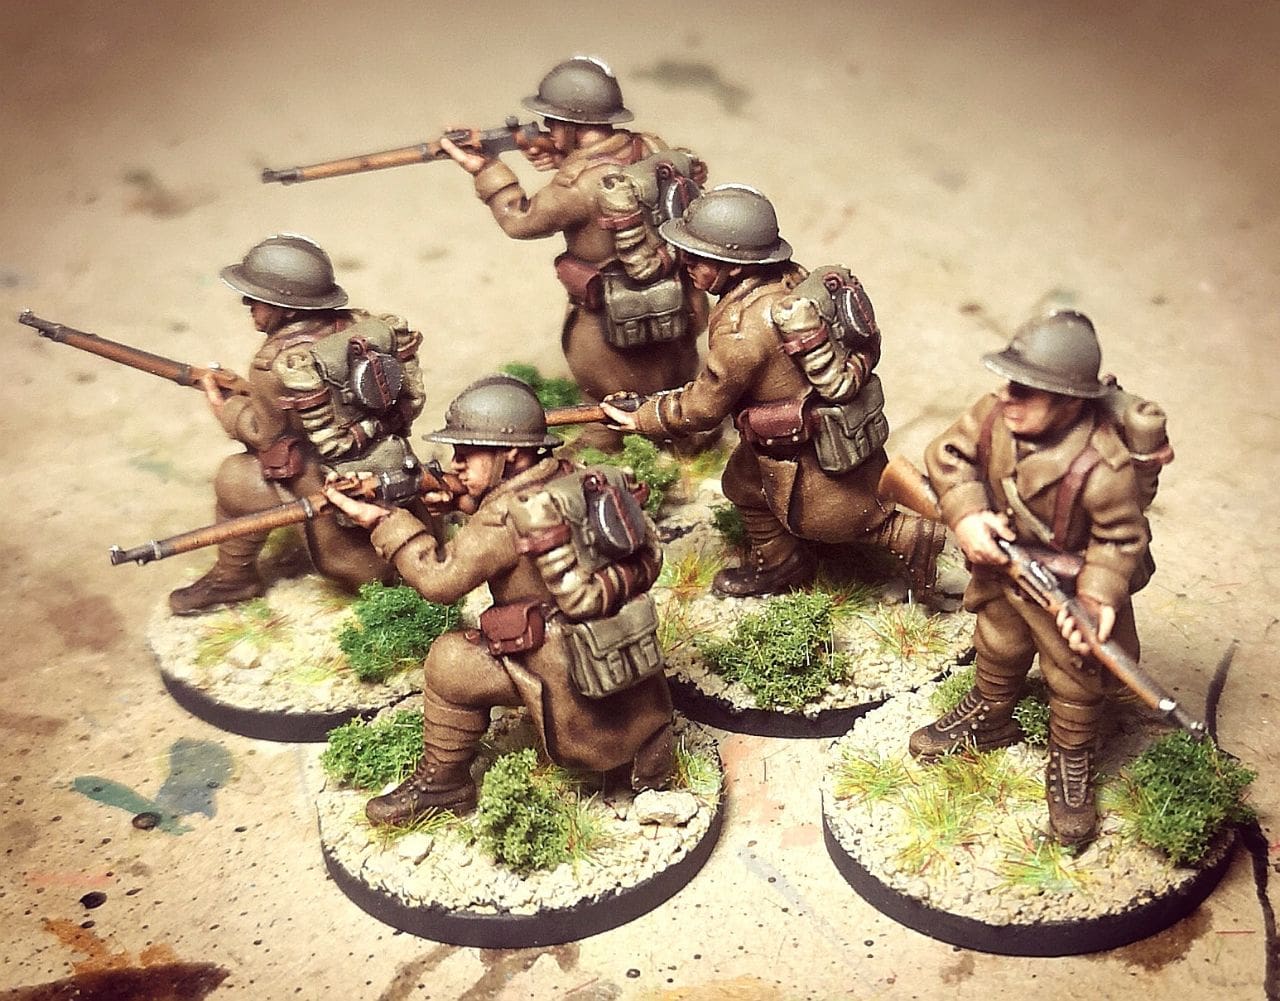 Bolt Action : French Army Cavalry A